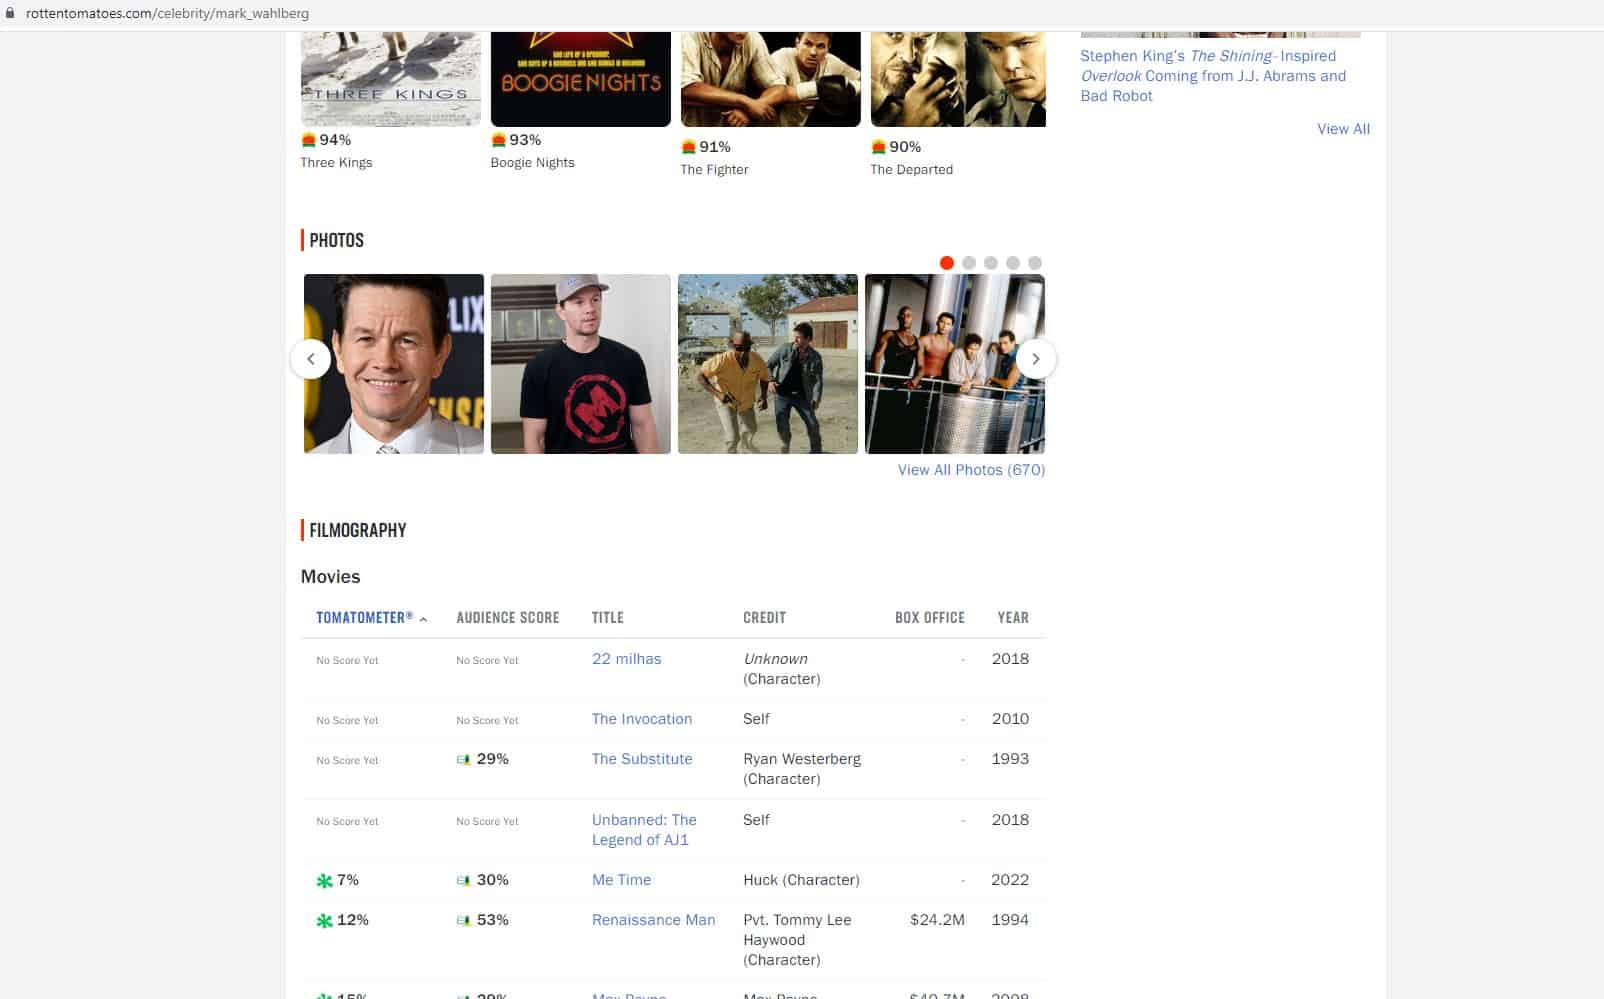 Mark Wahlberg's Rotten Tomatoes Page